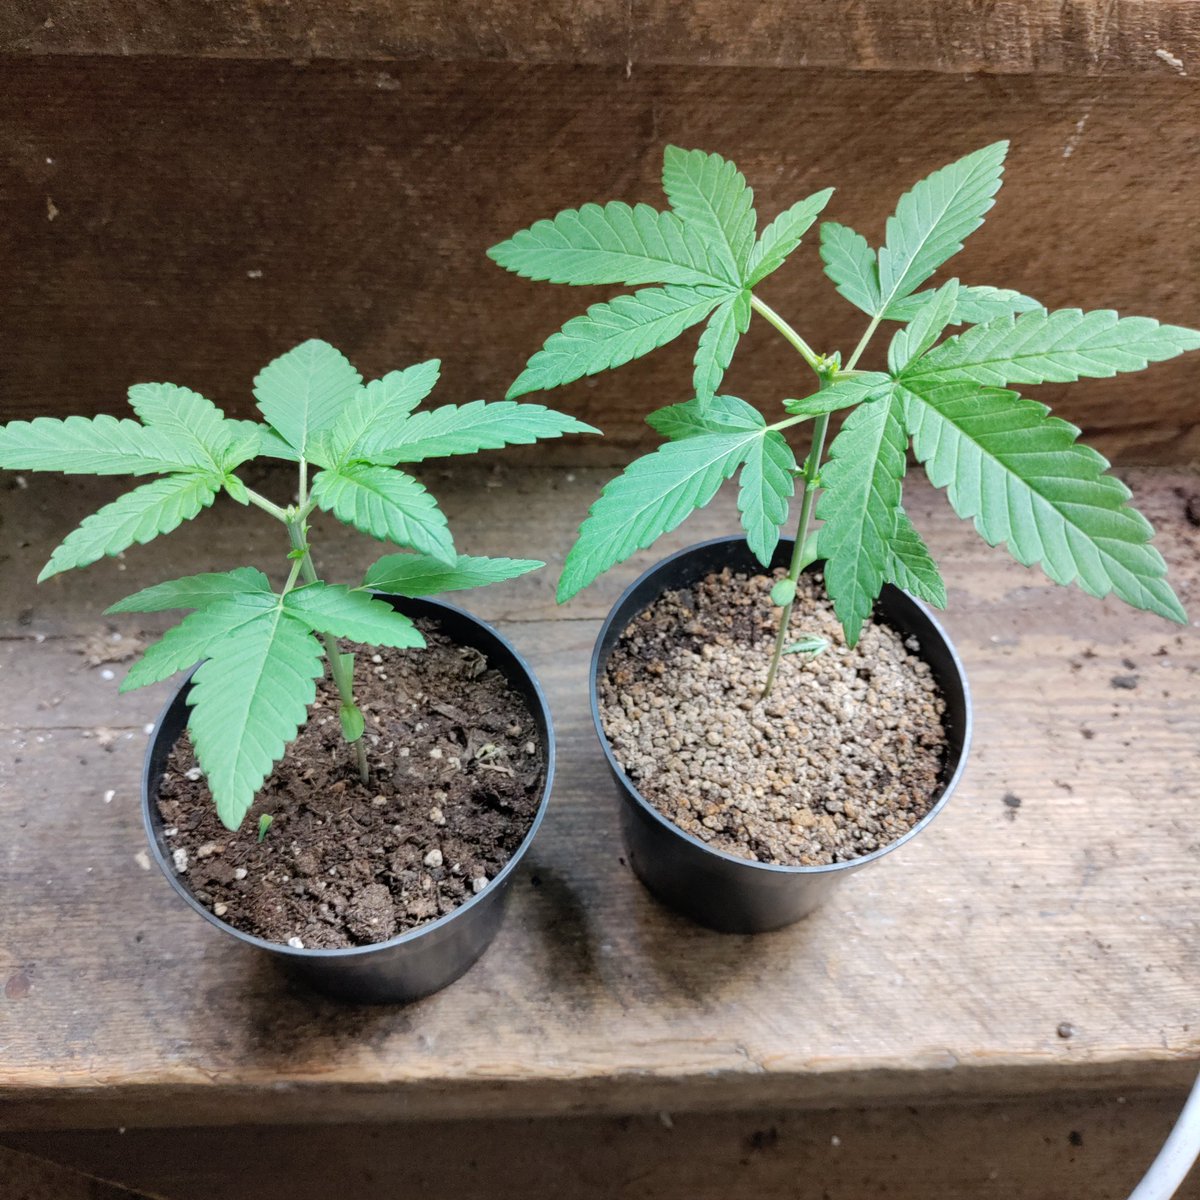 #irvinearmy update: Super Silver Haze X Cherry Pie @breeder_j @irvineseedco 
Chugging along nicely after topping. 💪🏾 Could use a feeding but they're not really as hungry as I was expecting. 👍🏾👍🏾 #growyourown #CannabisCommunity #Mmemberville